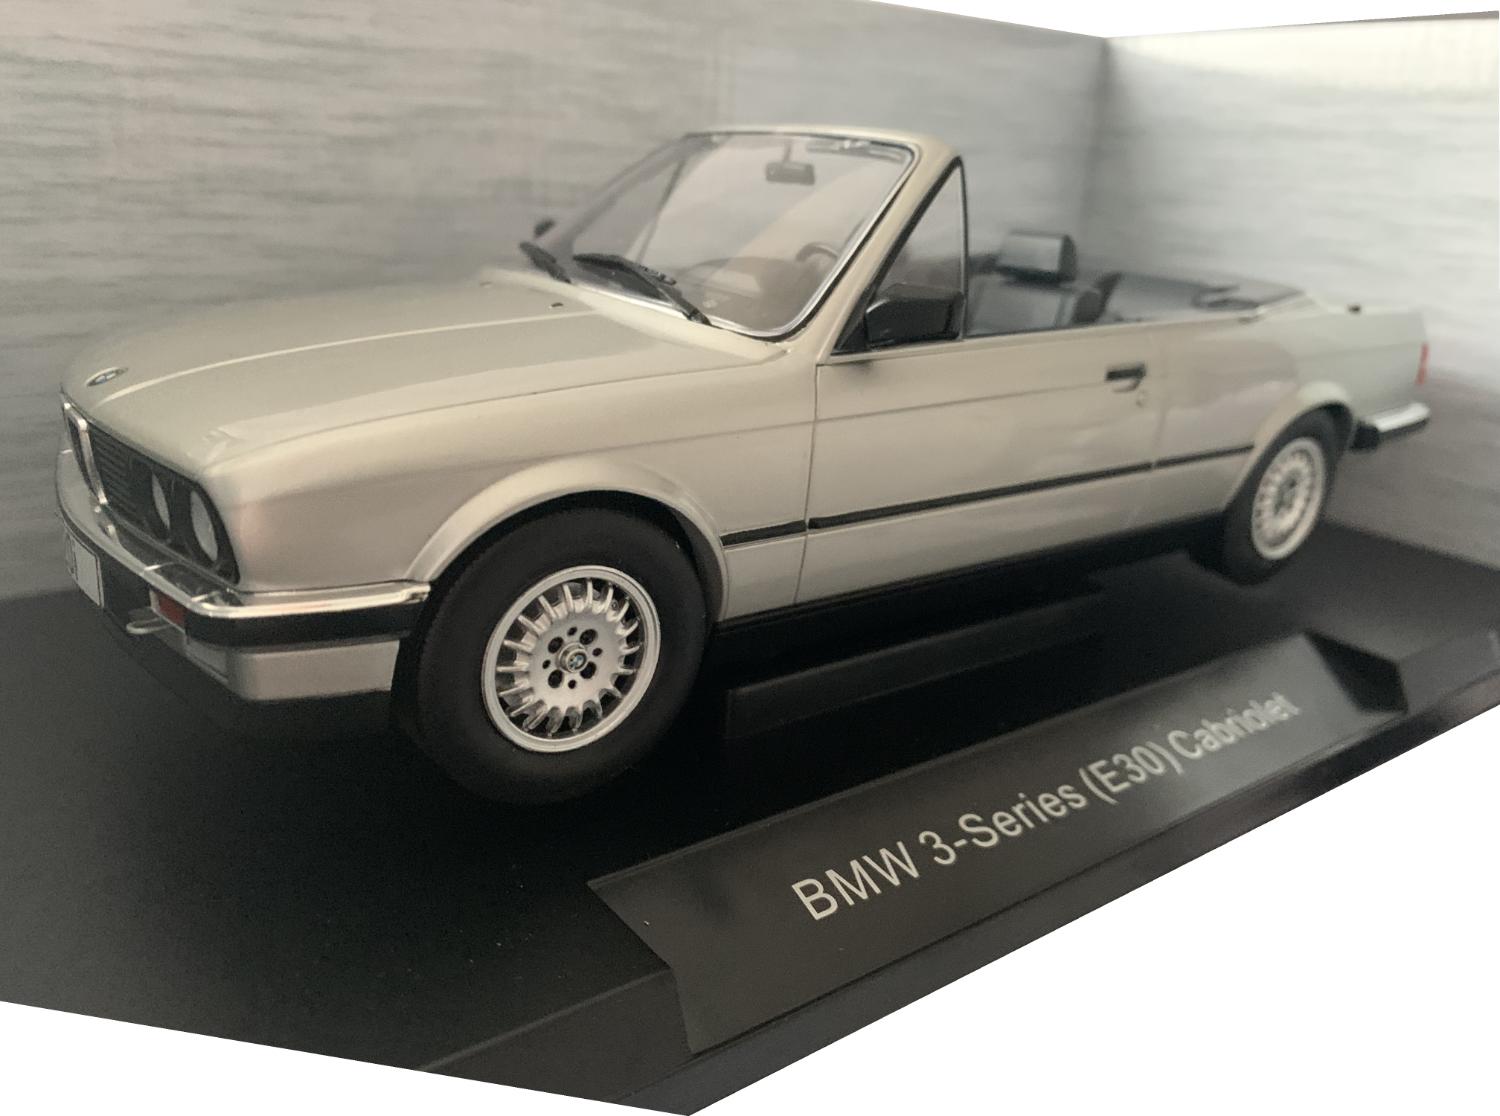 BMW 3 Series (E30) Cabriolet 1985 in silver 1:18 scale model from Model Car Group